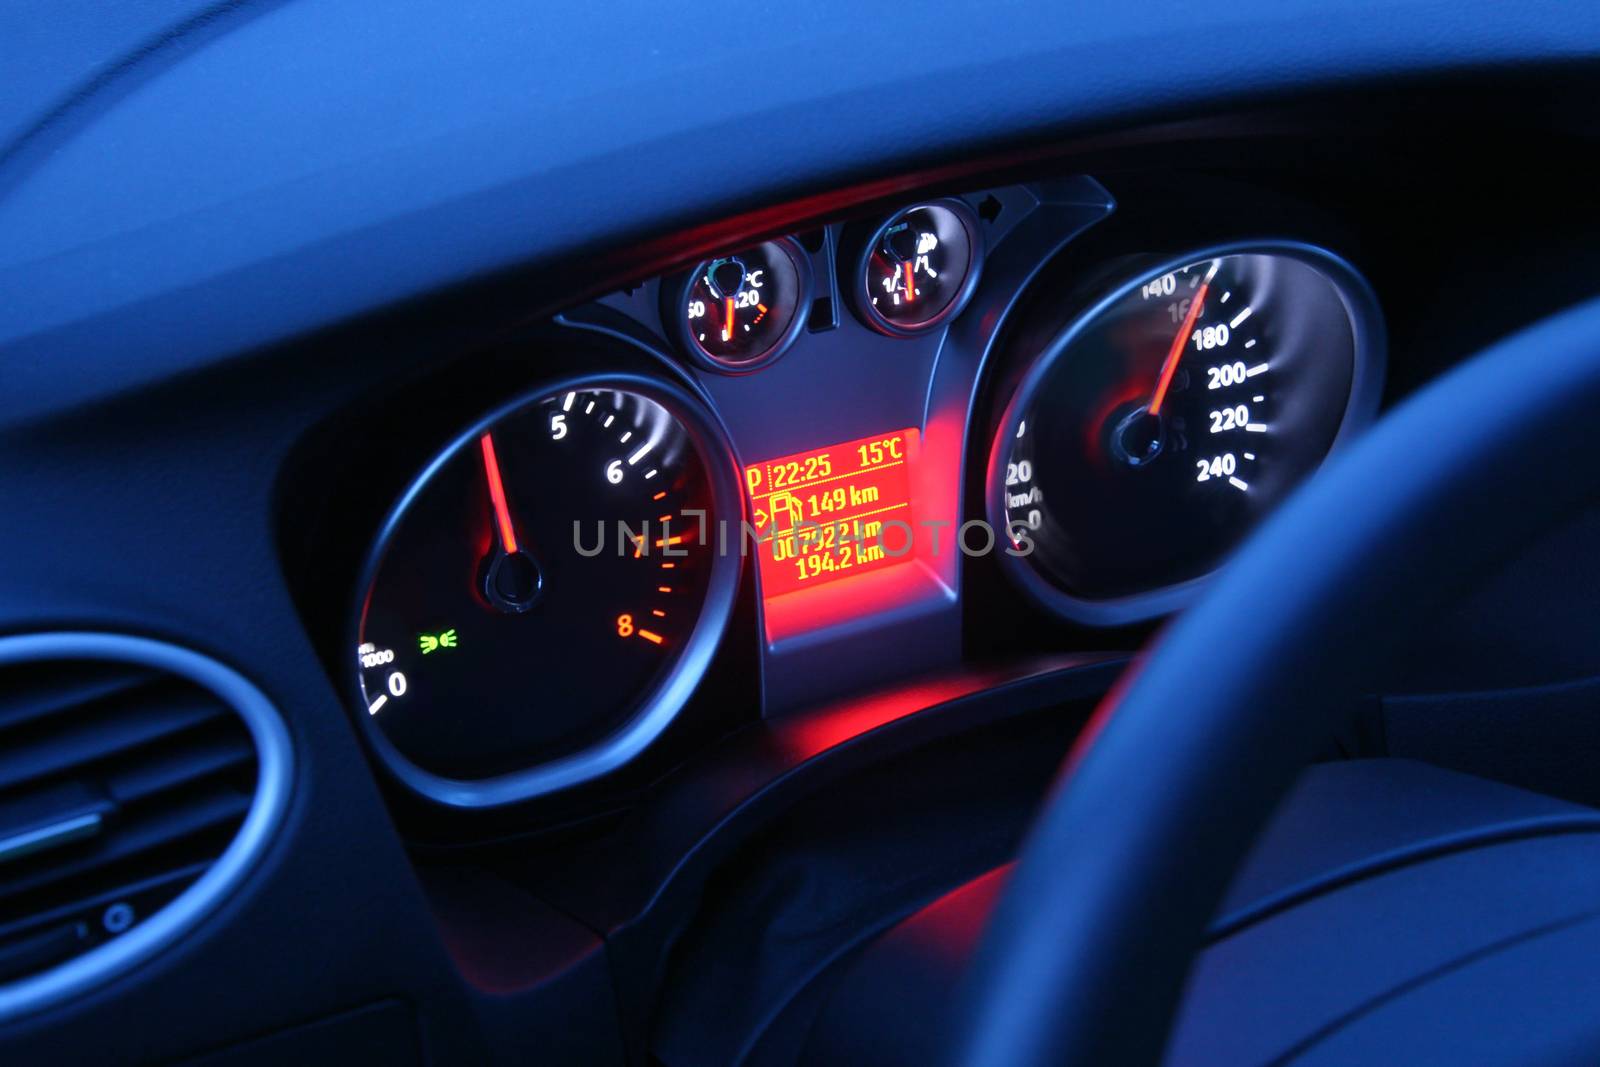  panel of devices of the car rushing by night